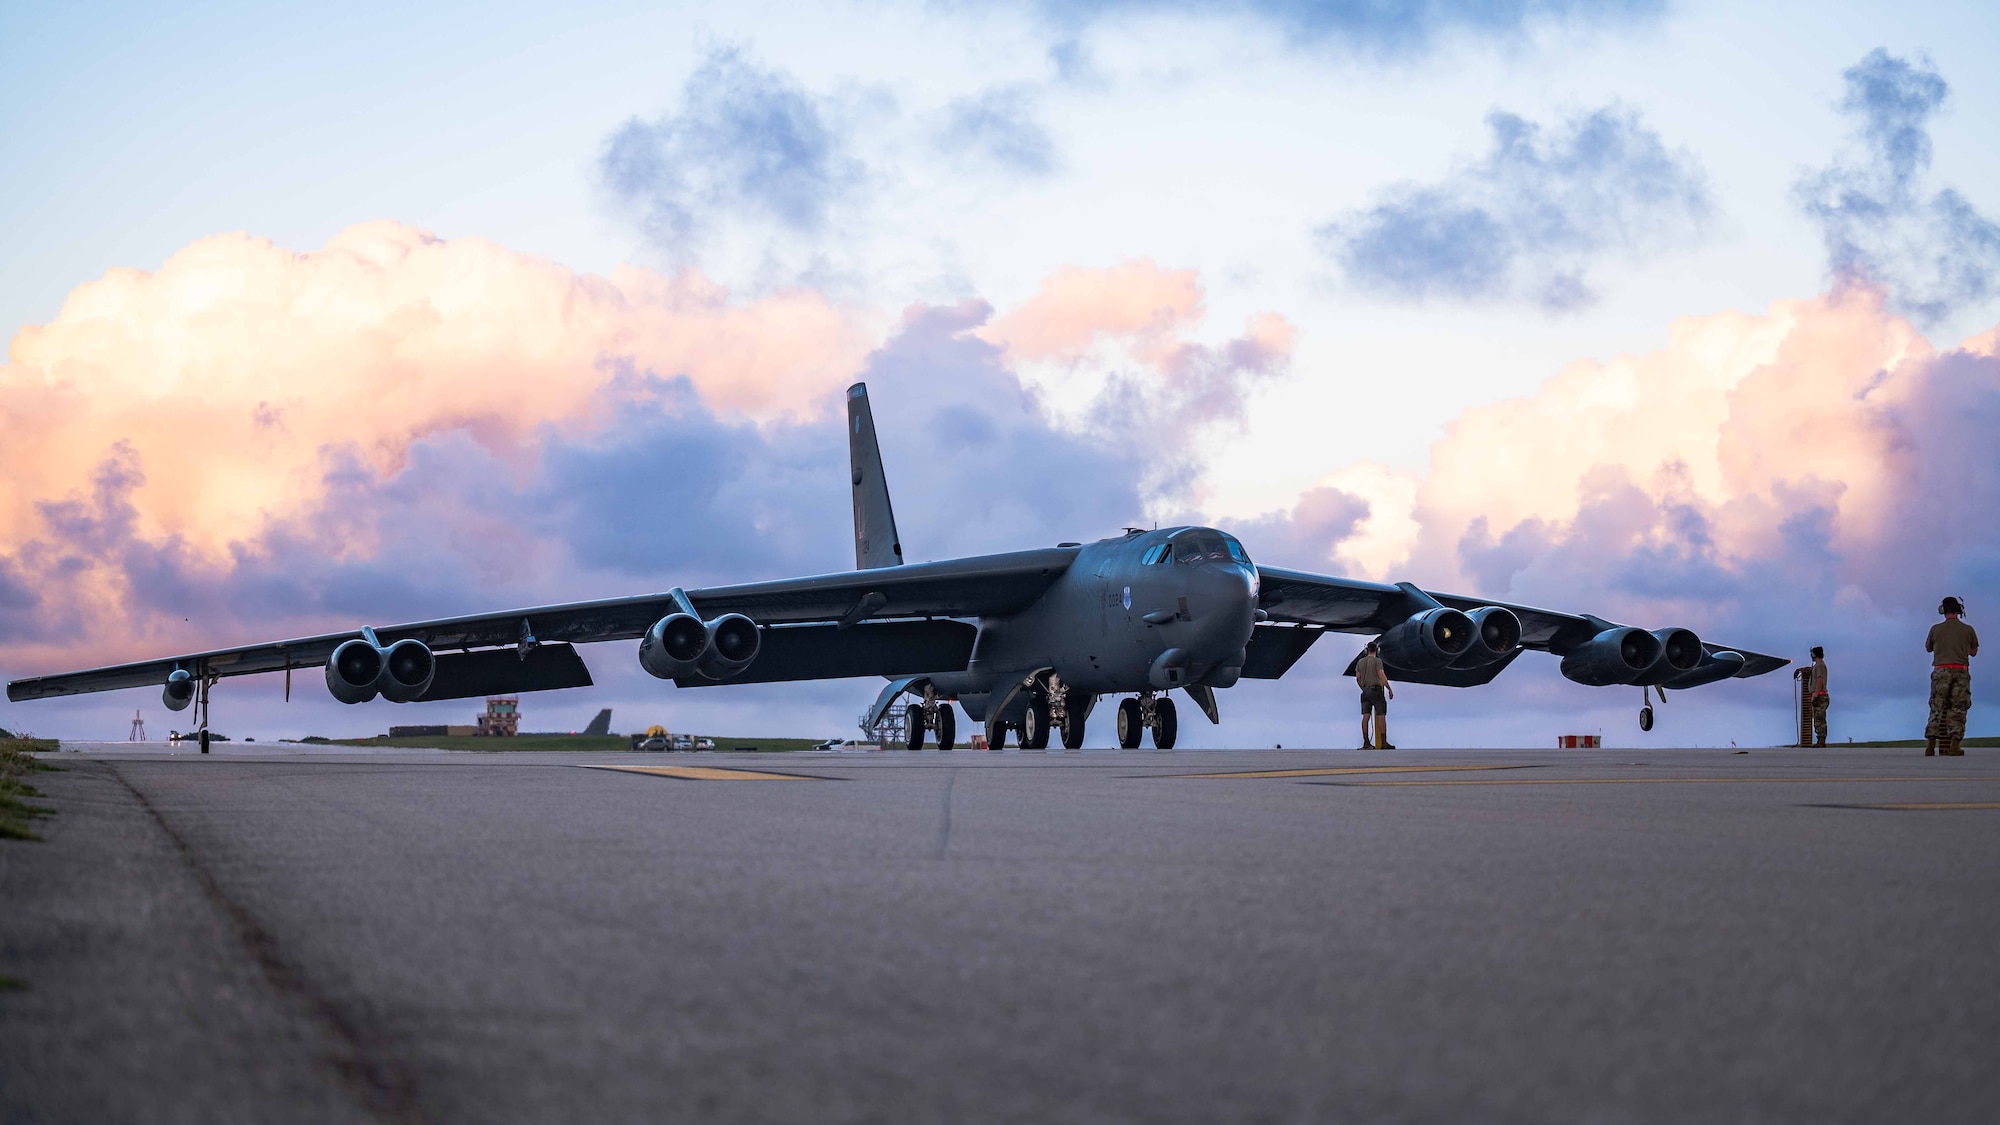 A B-52 Stratofortress assigned to a Bomber Task Force from the 2nd Bomb Wing at Barksdale Air Force Base, Louisiana, taxis at Andersen Air Force Base, Guam, April 1, 2023. Bomber missions are designed to showcase Pacific Air Forces’ ability to deter, deny, and dominate any influence or aggression from adversaries or competitors. (U.S. Air Force photo by Airman 1st Class William Pugh)